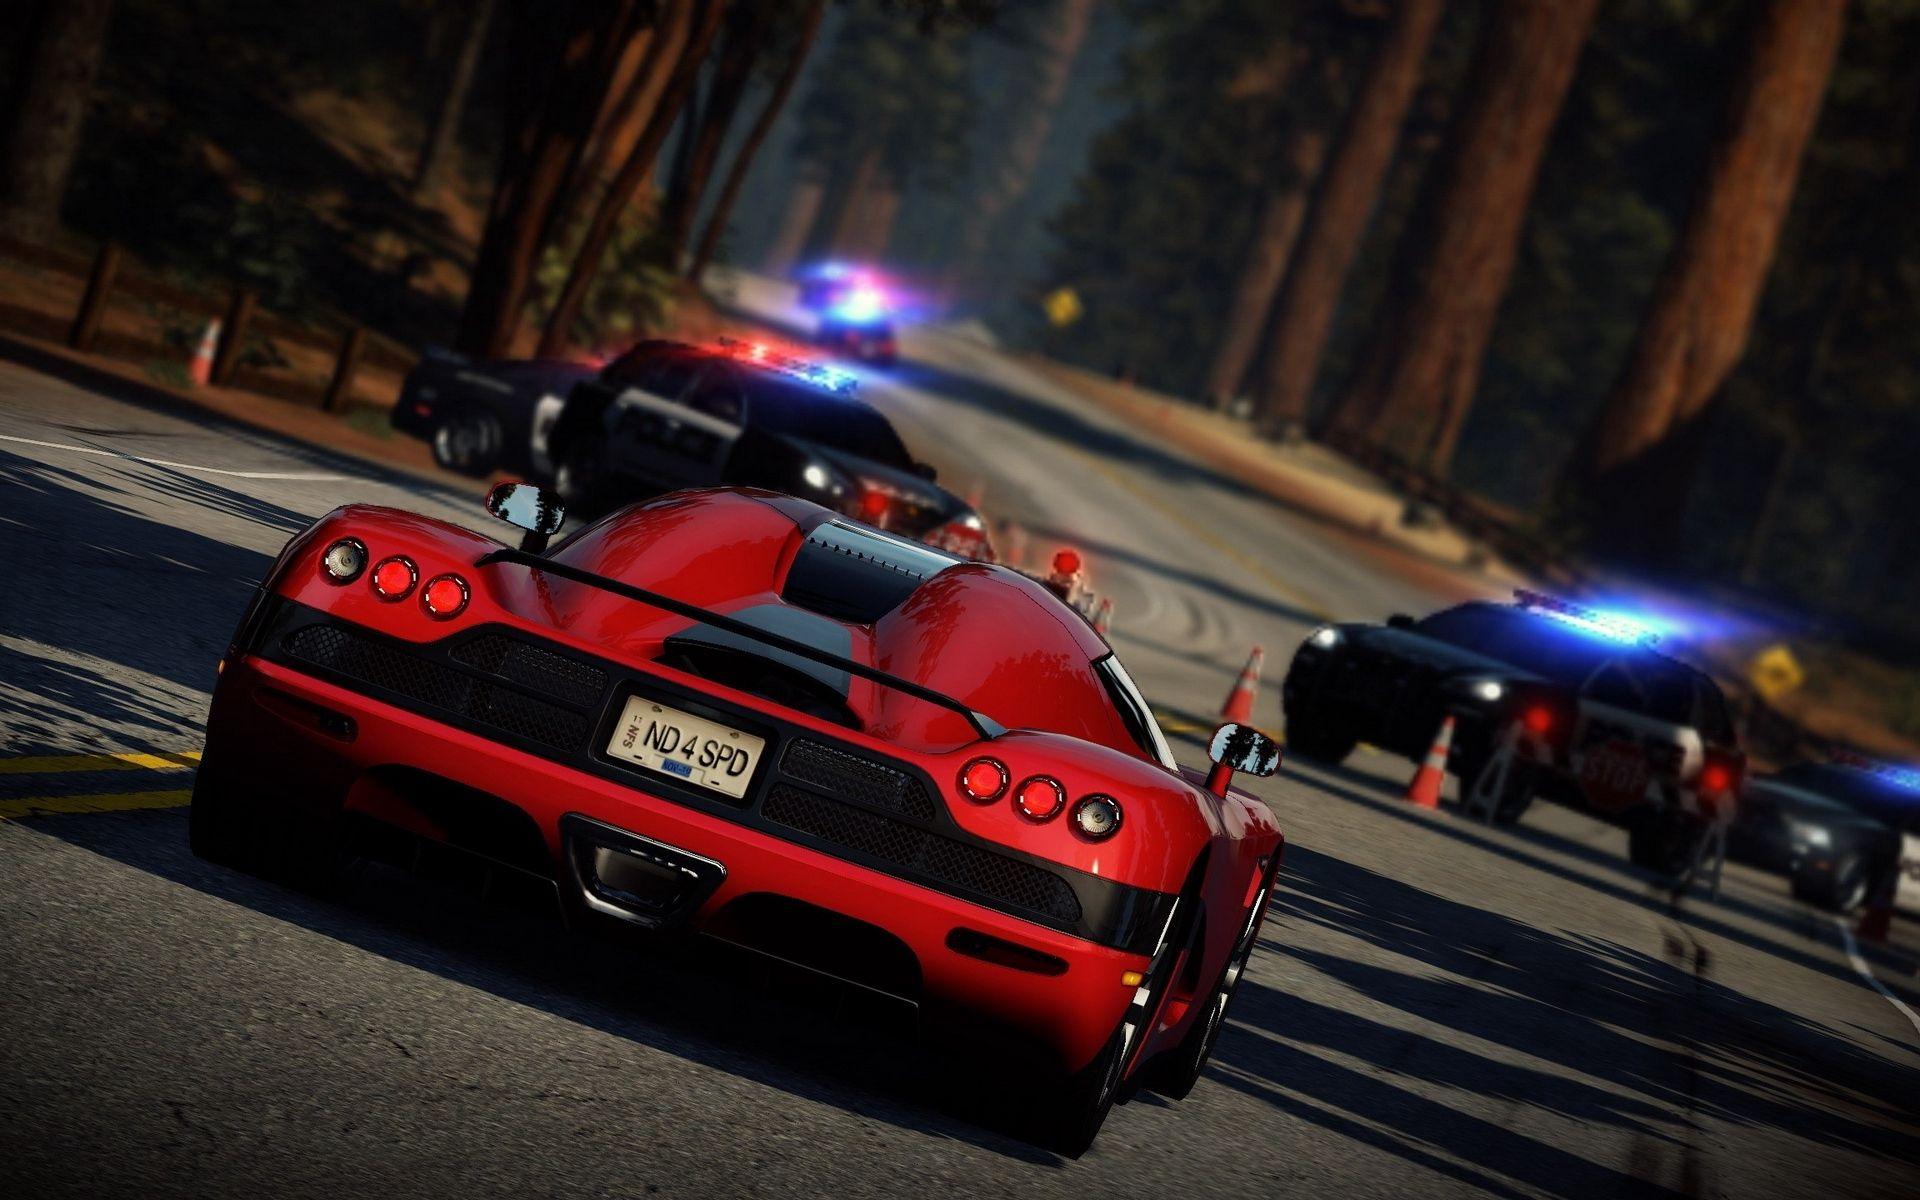 Download wallpaper 1920x1200 nfs, need for speed, car, pocile, road